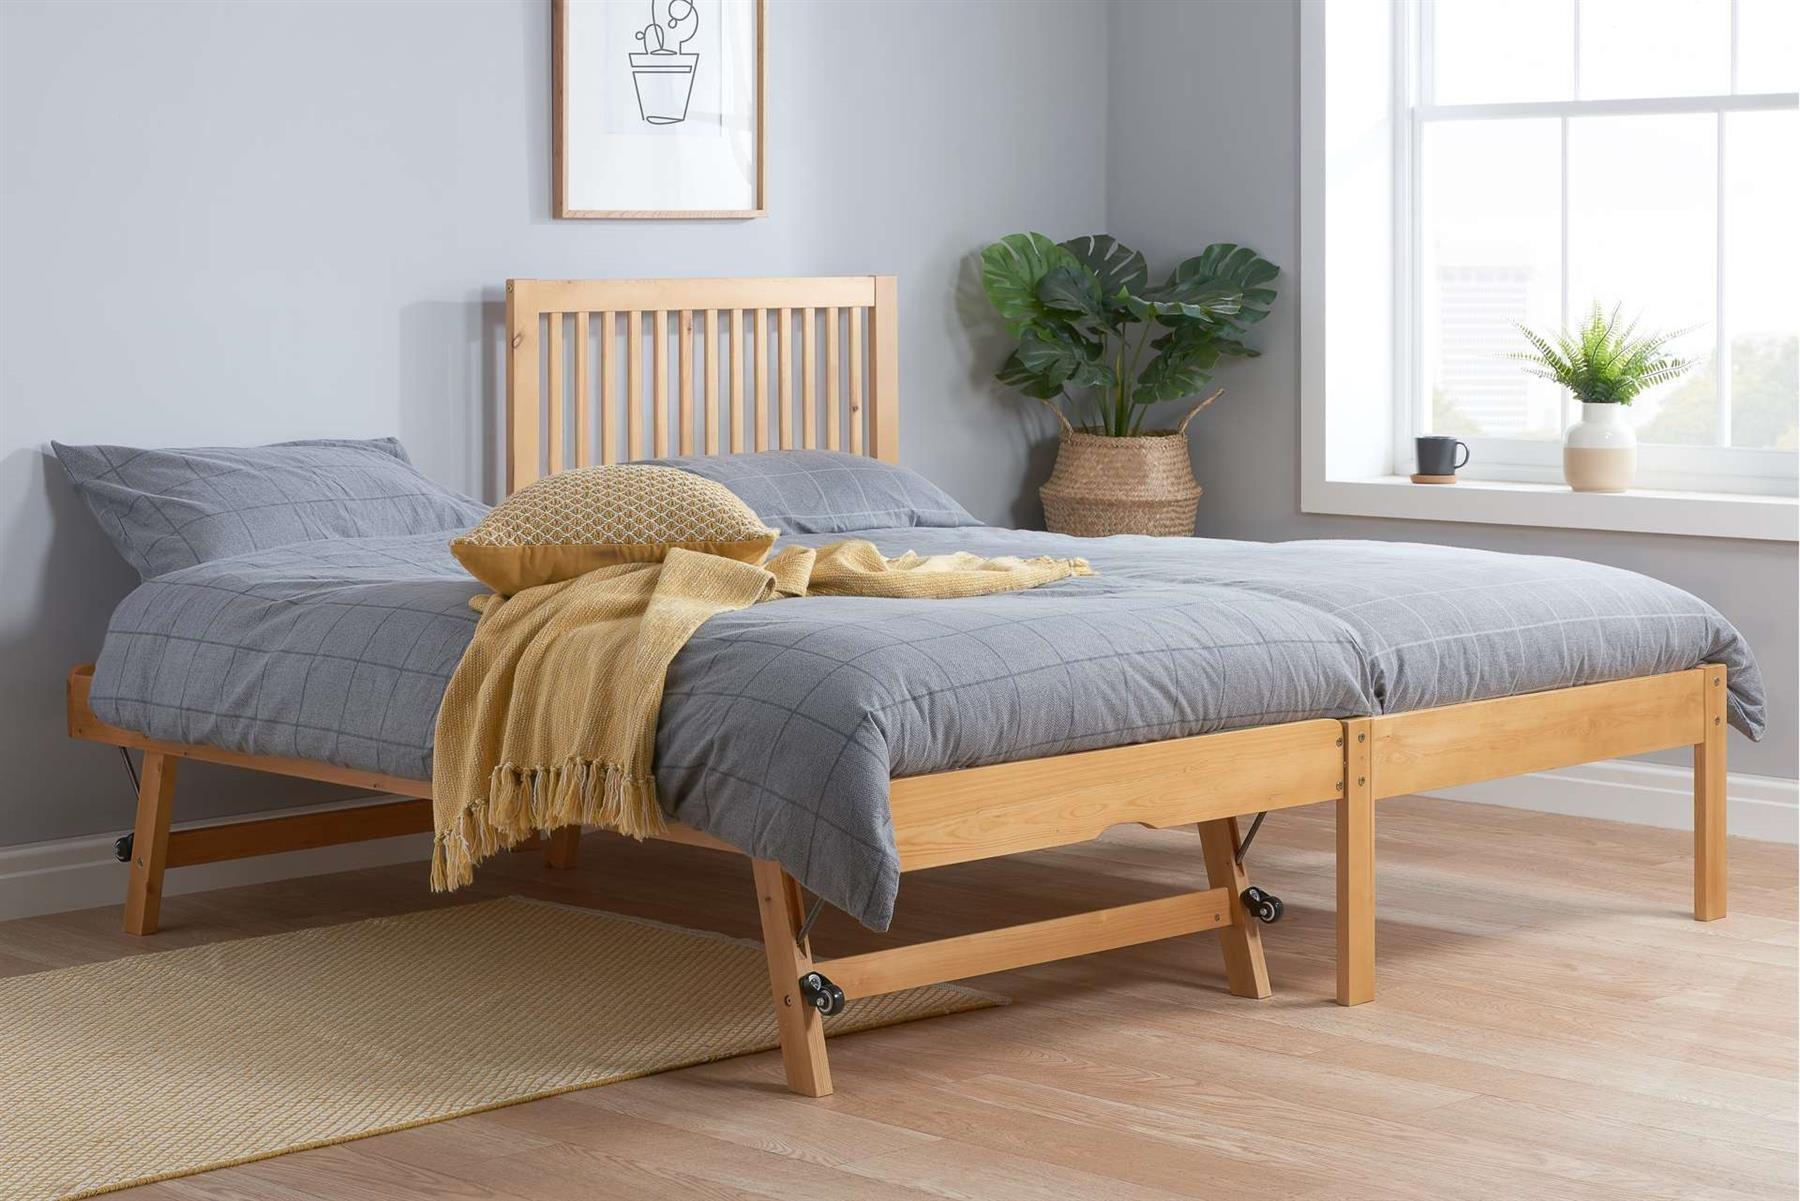 Pine Wood Guest Bed 2 mattresses Birlea Buxton Trundle Frame Hideaway Stop Over